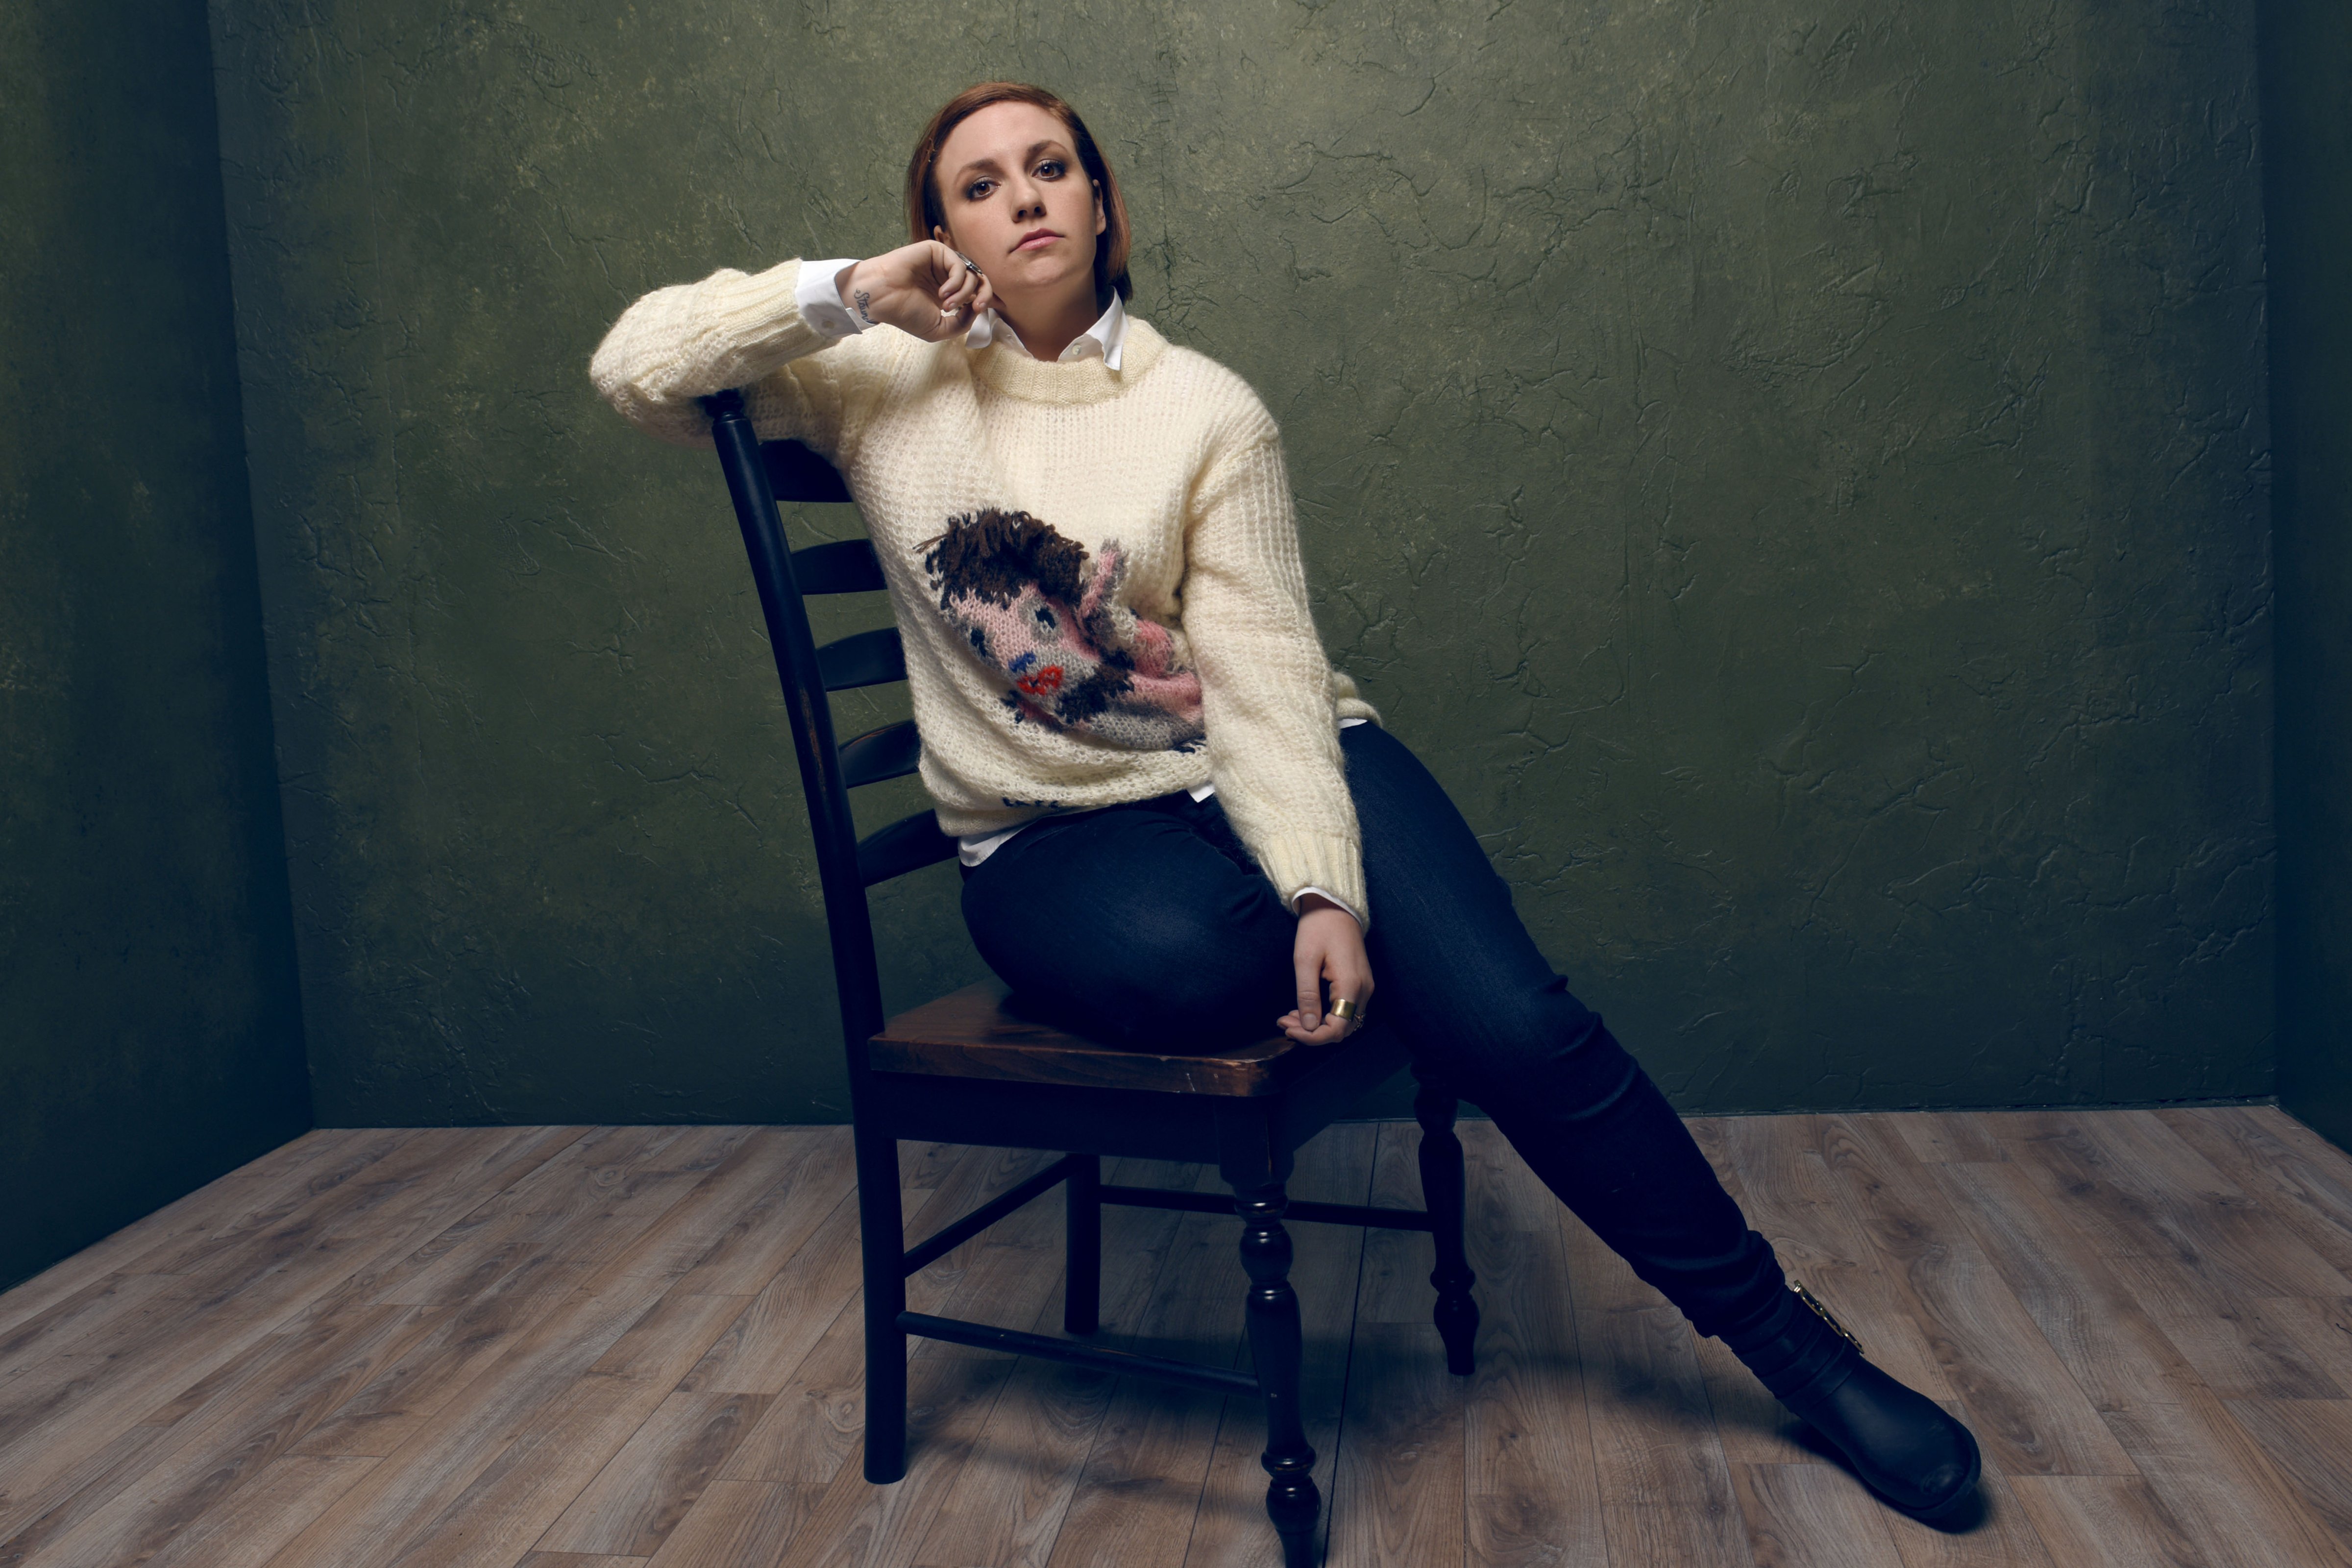 Lena Dunham during the 2015 Sundance Film Festival.  The actress recently penned an essay on her thoughts on the 2016 U.S. presidential election. (Larry Busacca—Getty Images)